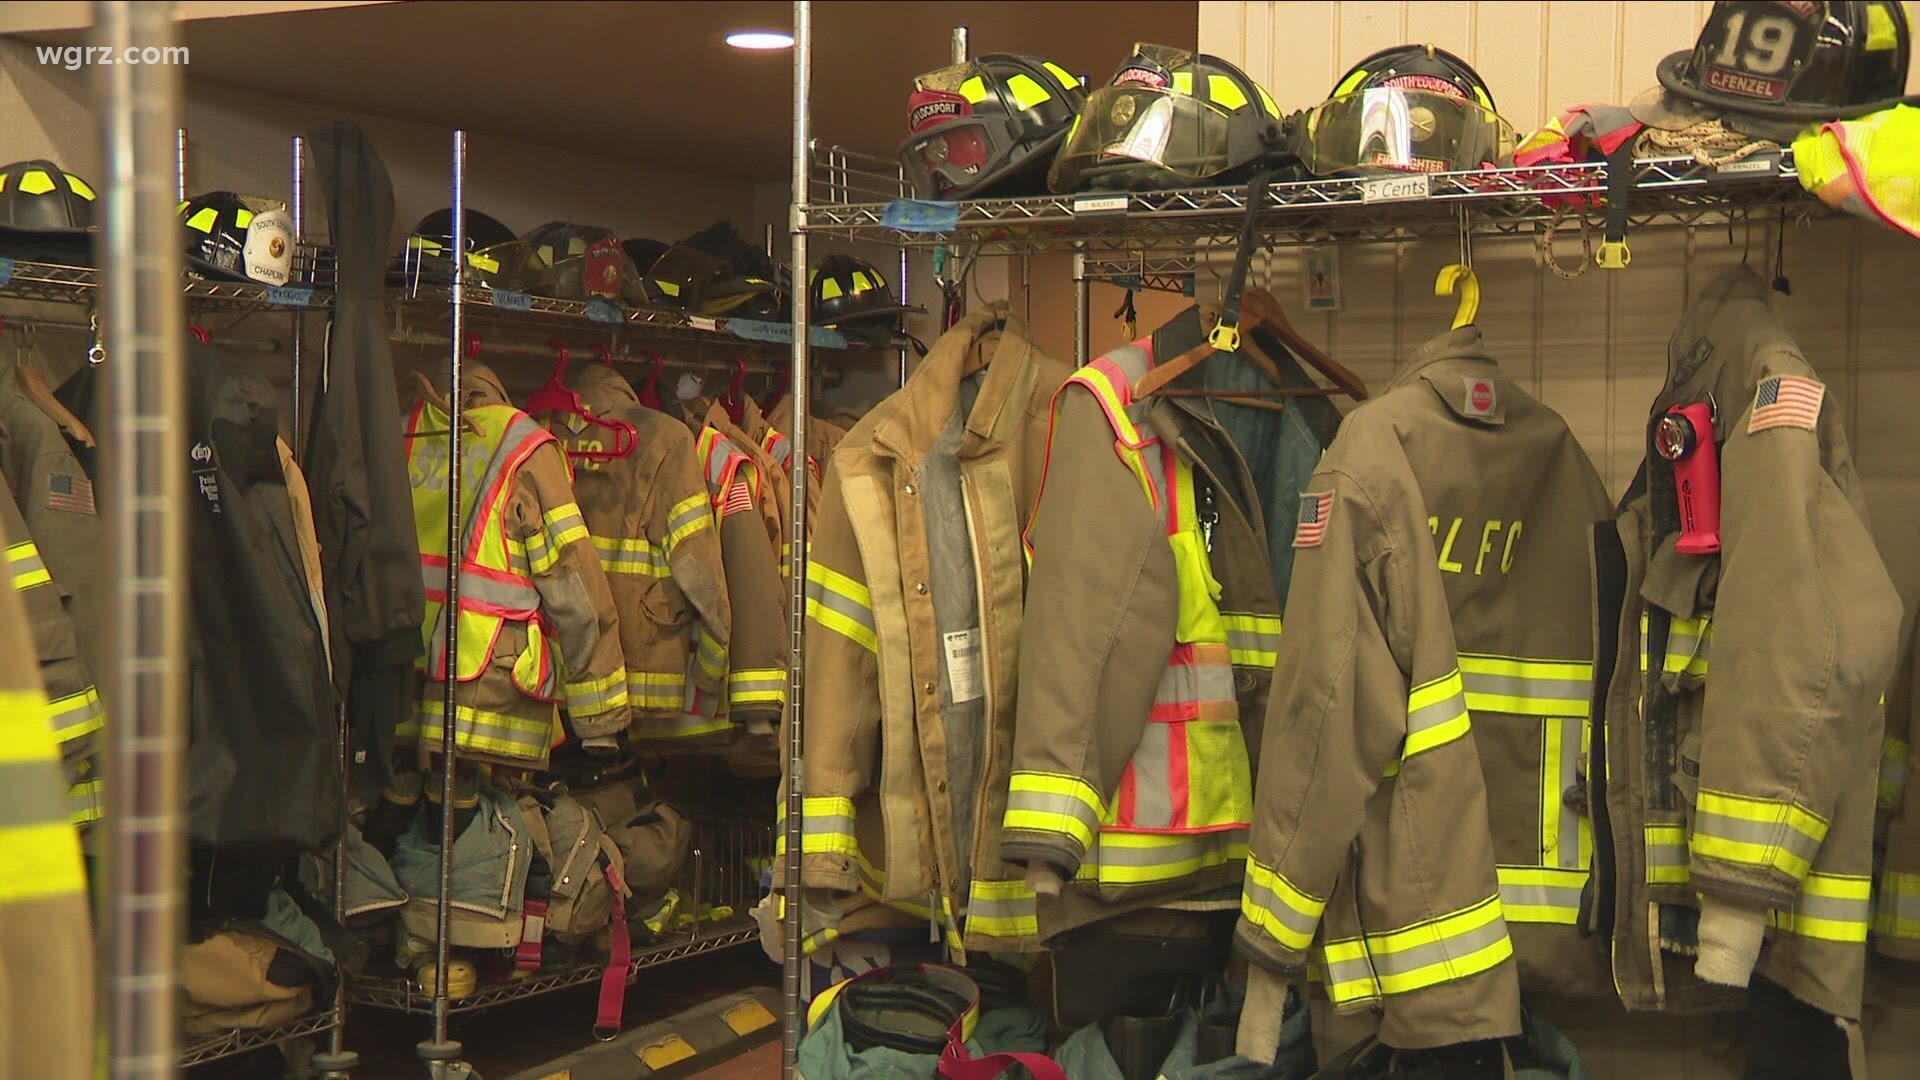 Recruitment and retention coordinator at Bellevue Fire District in Cheektowaga says they've seen declining volunteer numbers for years.